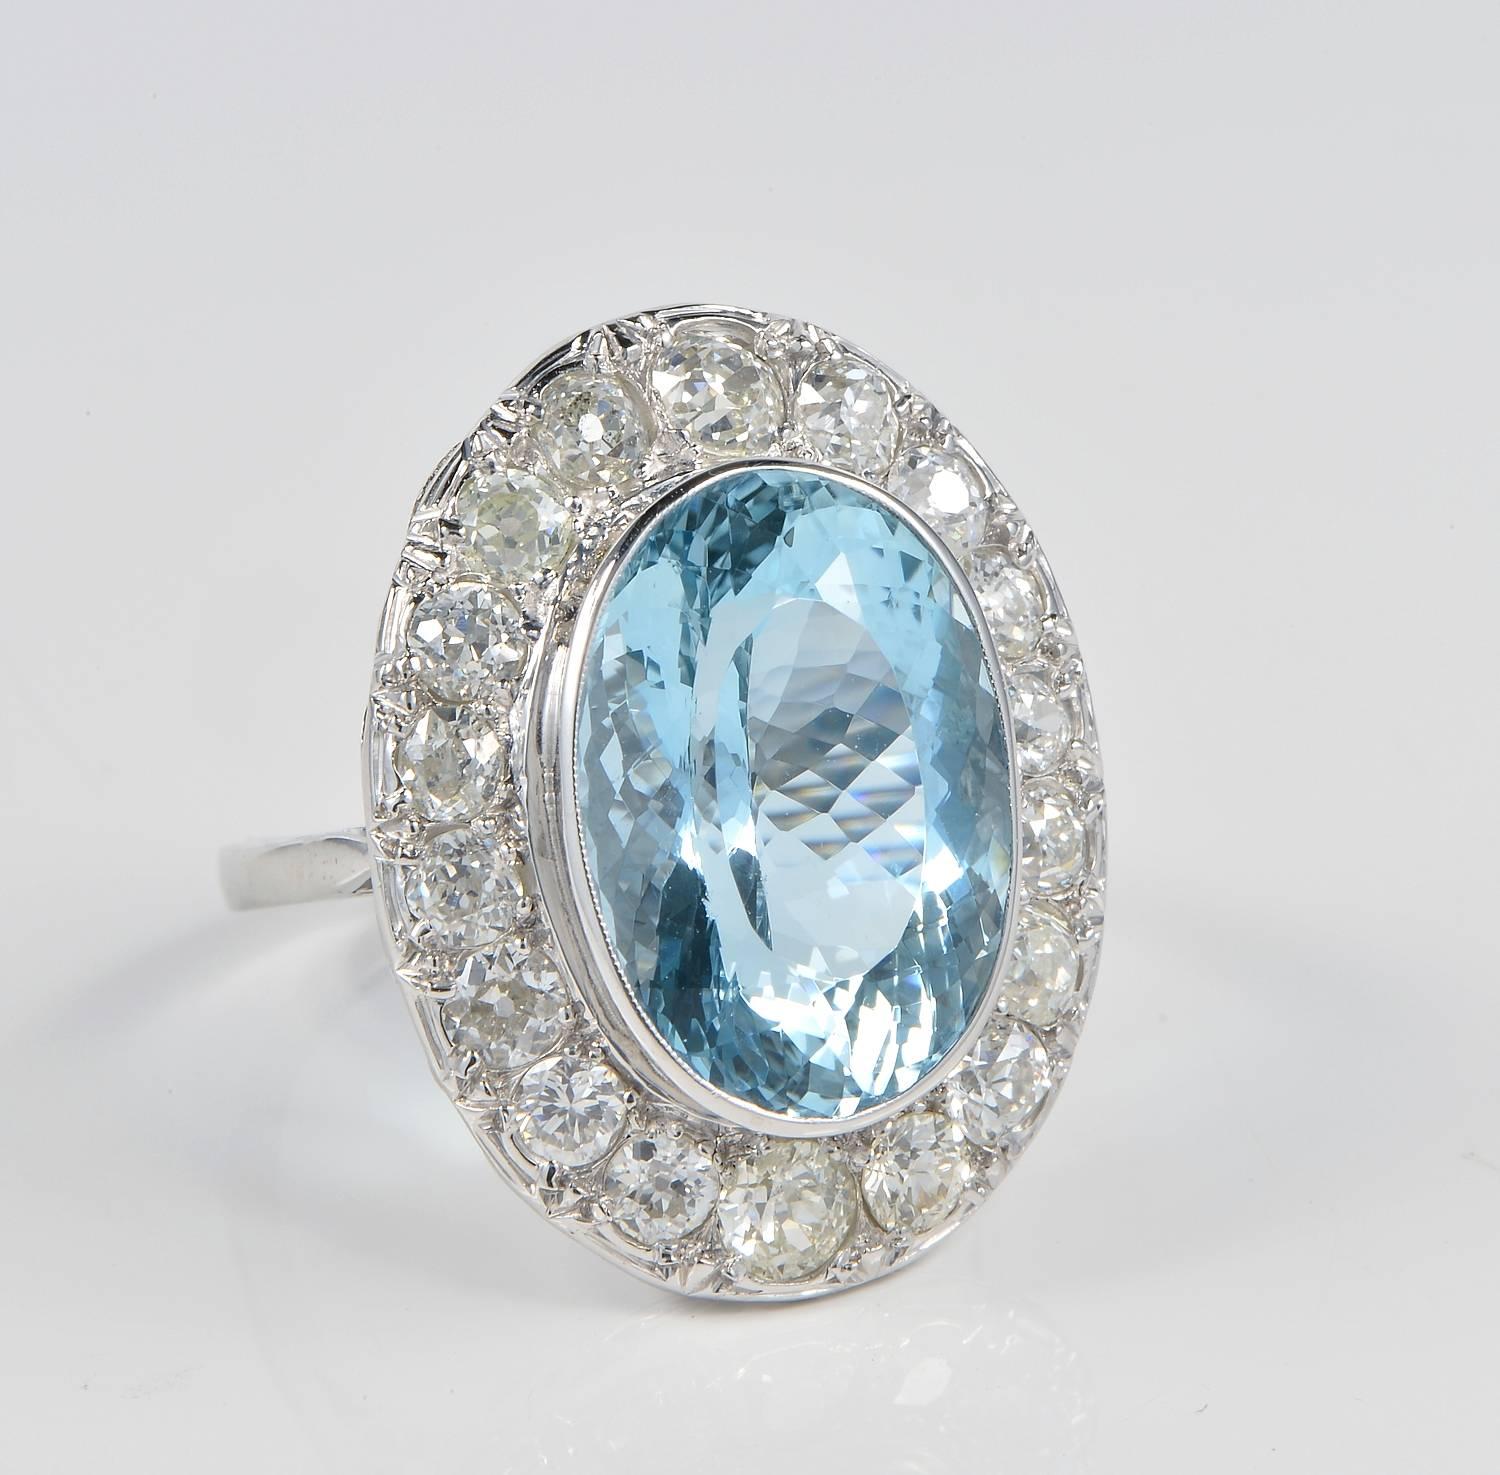 Art Deco heirloom ring set with large intense Blue natural Aquamarine and opulent content of old mine cut Diamonds high on the scale
Hand crafted of solid Platinum during 1920 ca – not marked 
Spectacular ring!
Beautiful mounting, finely detailed